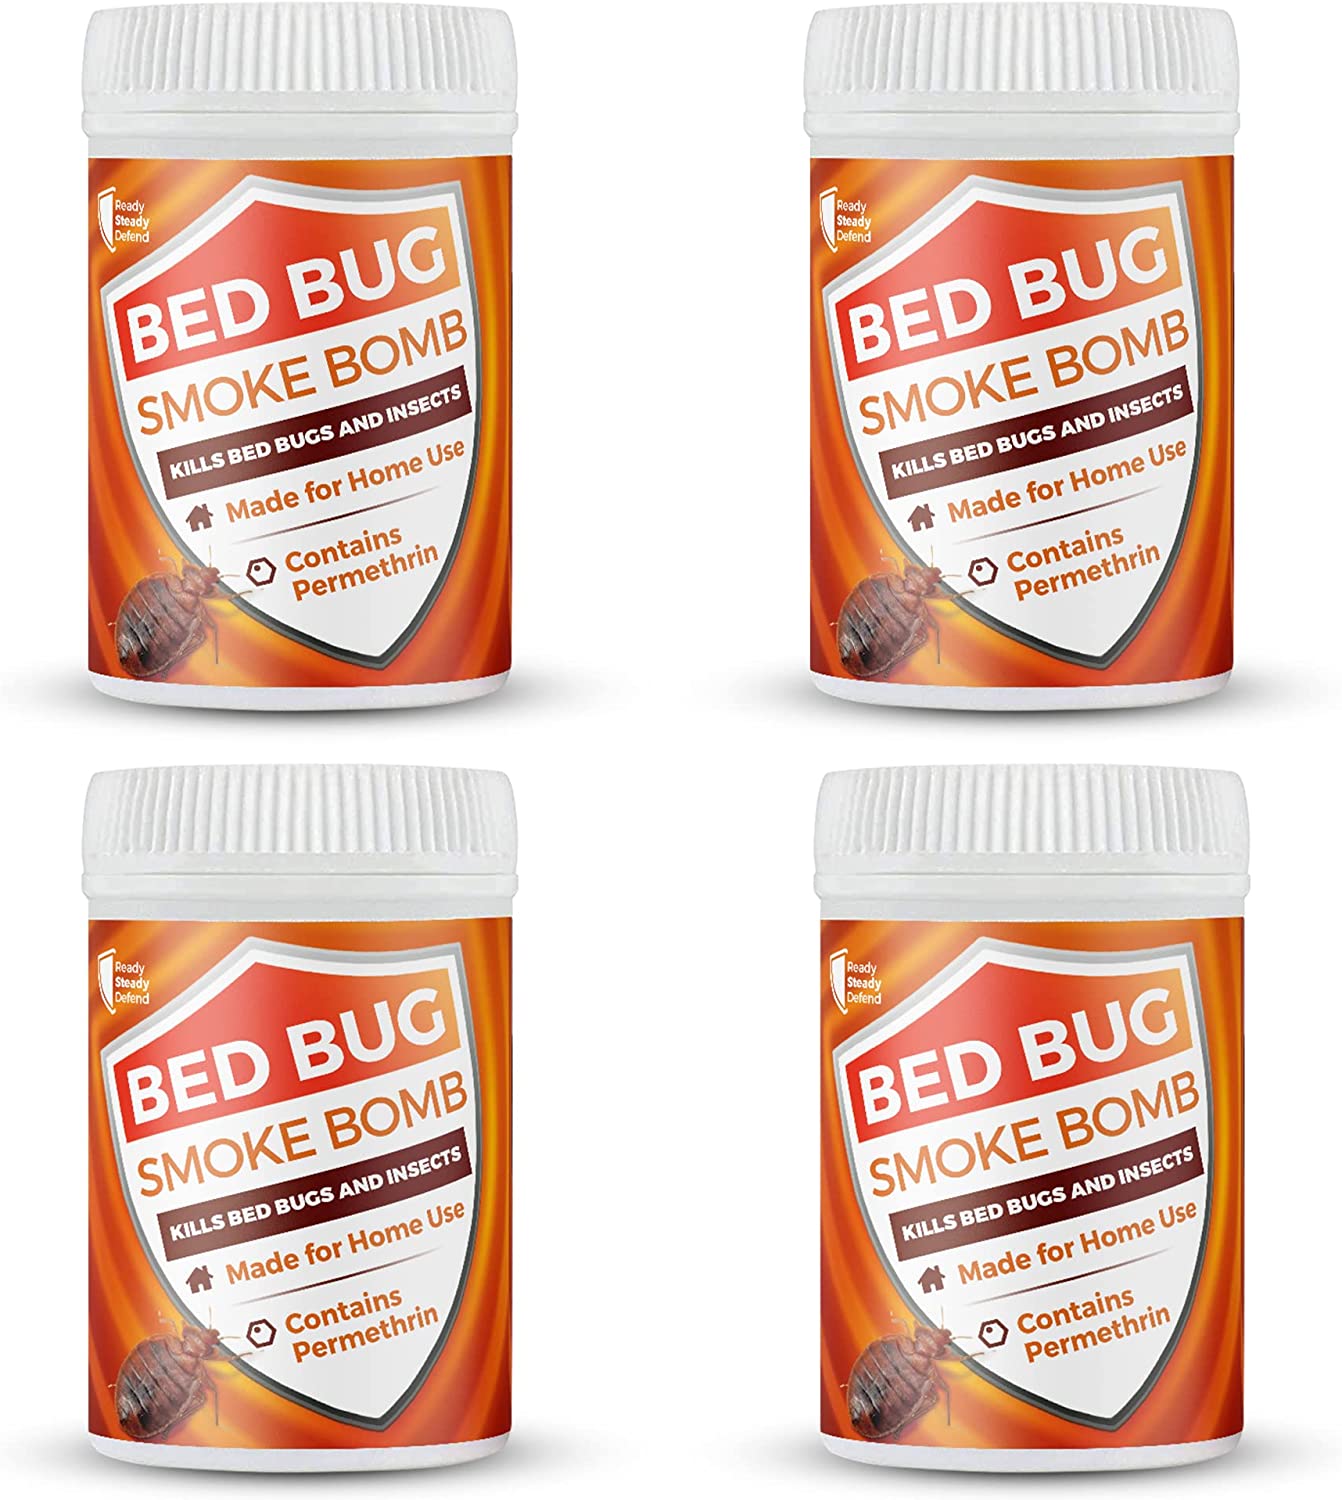 Bed Bug Smoke Bomb (Pack of 4)